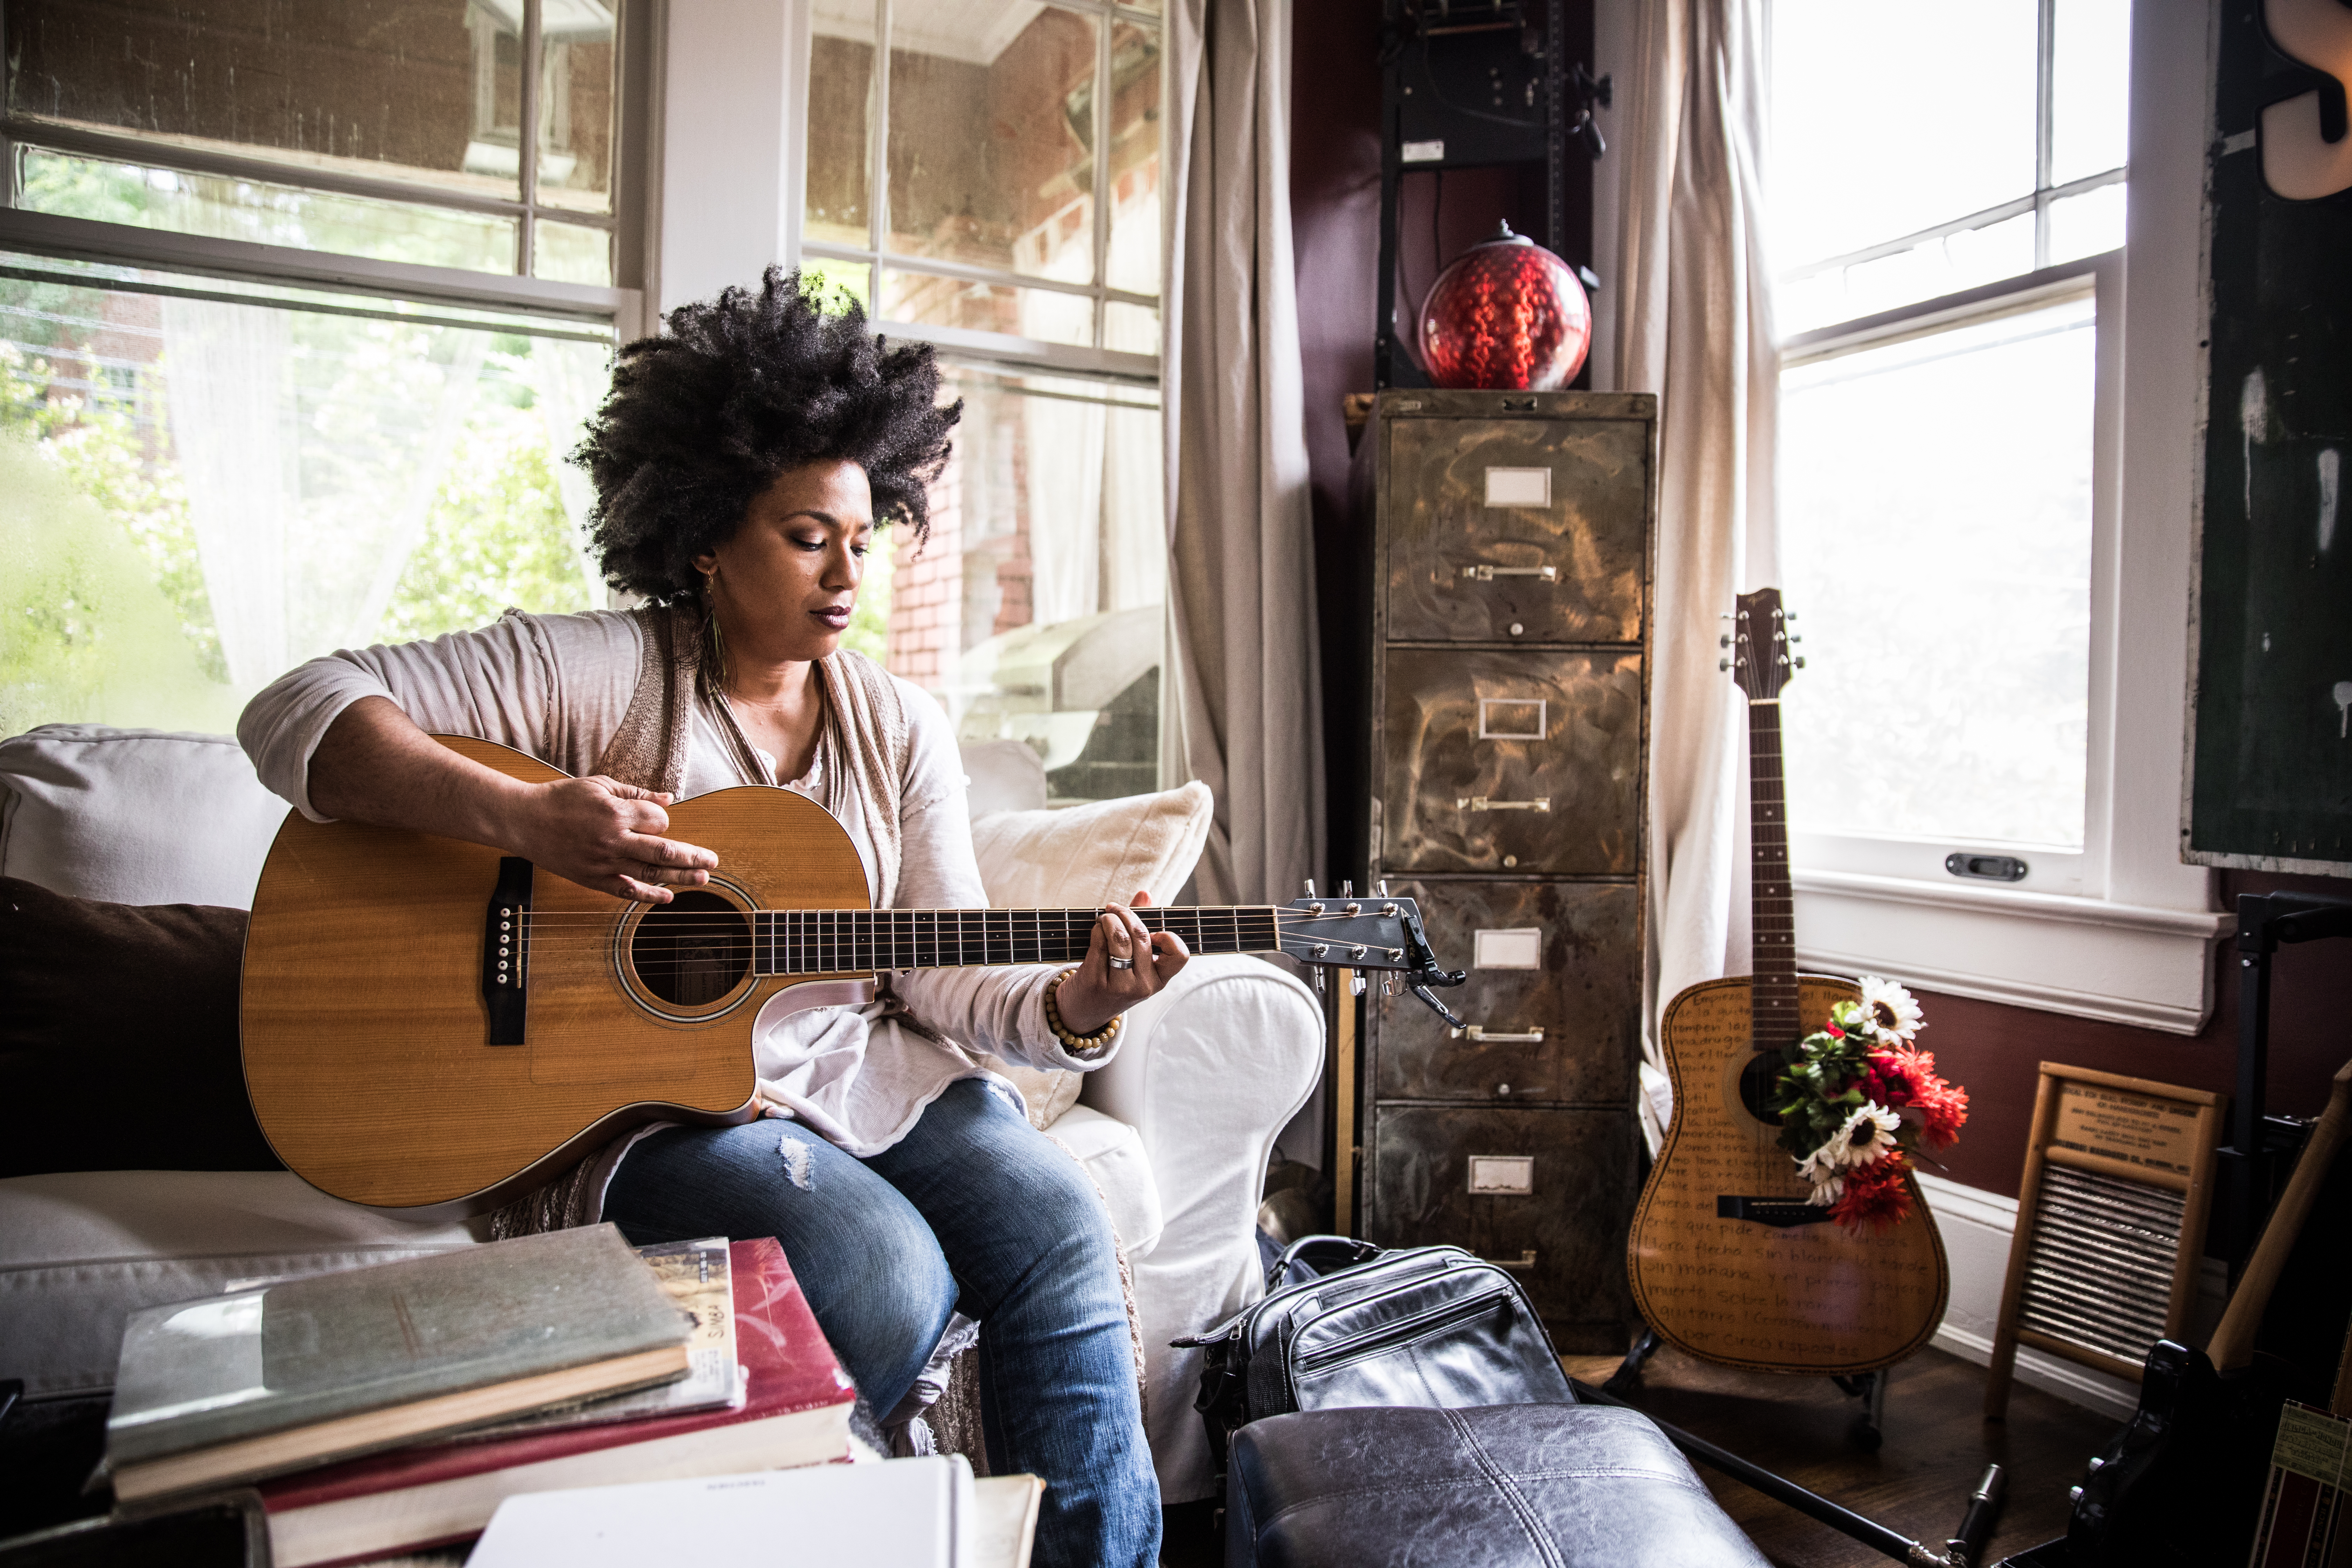 A woman playing guitar alone at home. | Source: Getty Images